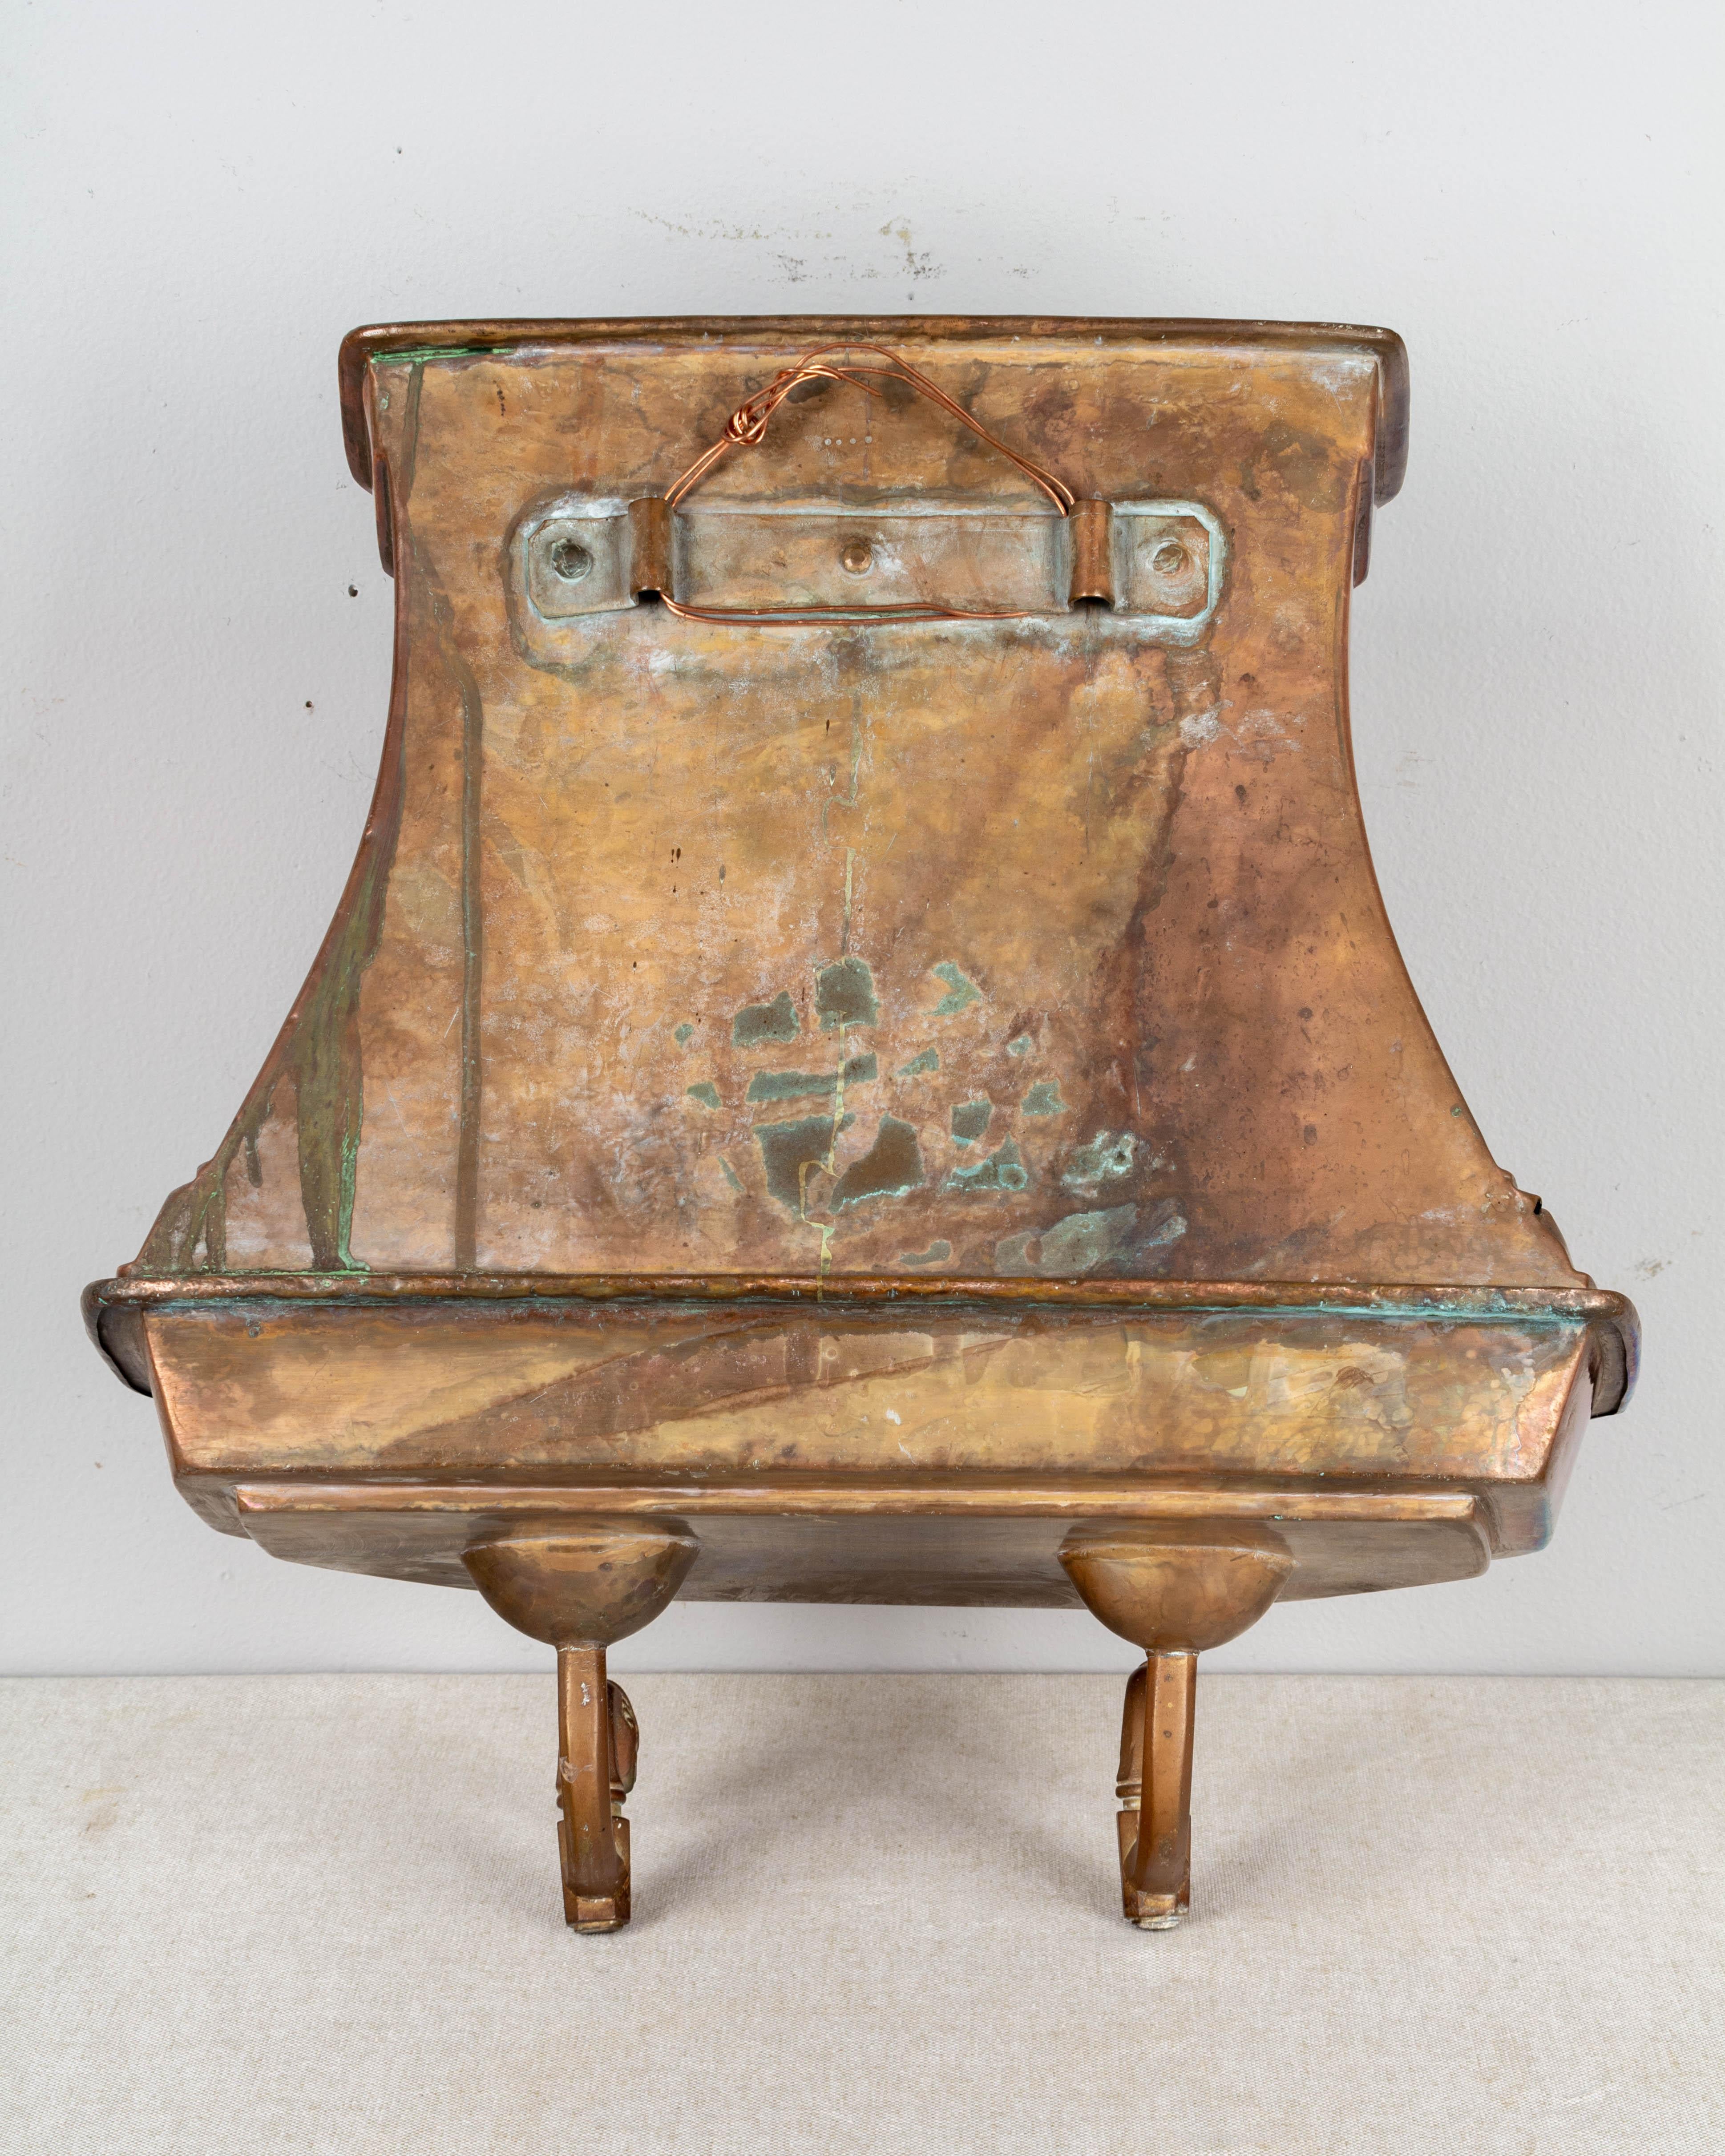 20th Century French Copper Lavabo with Large Basin